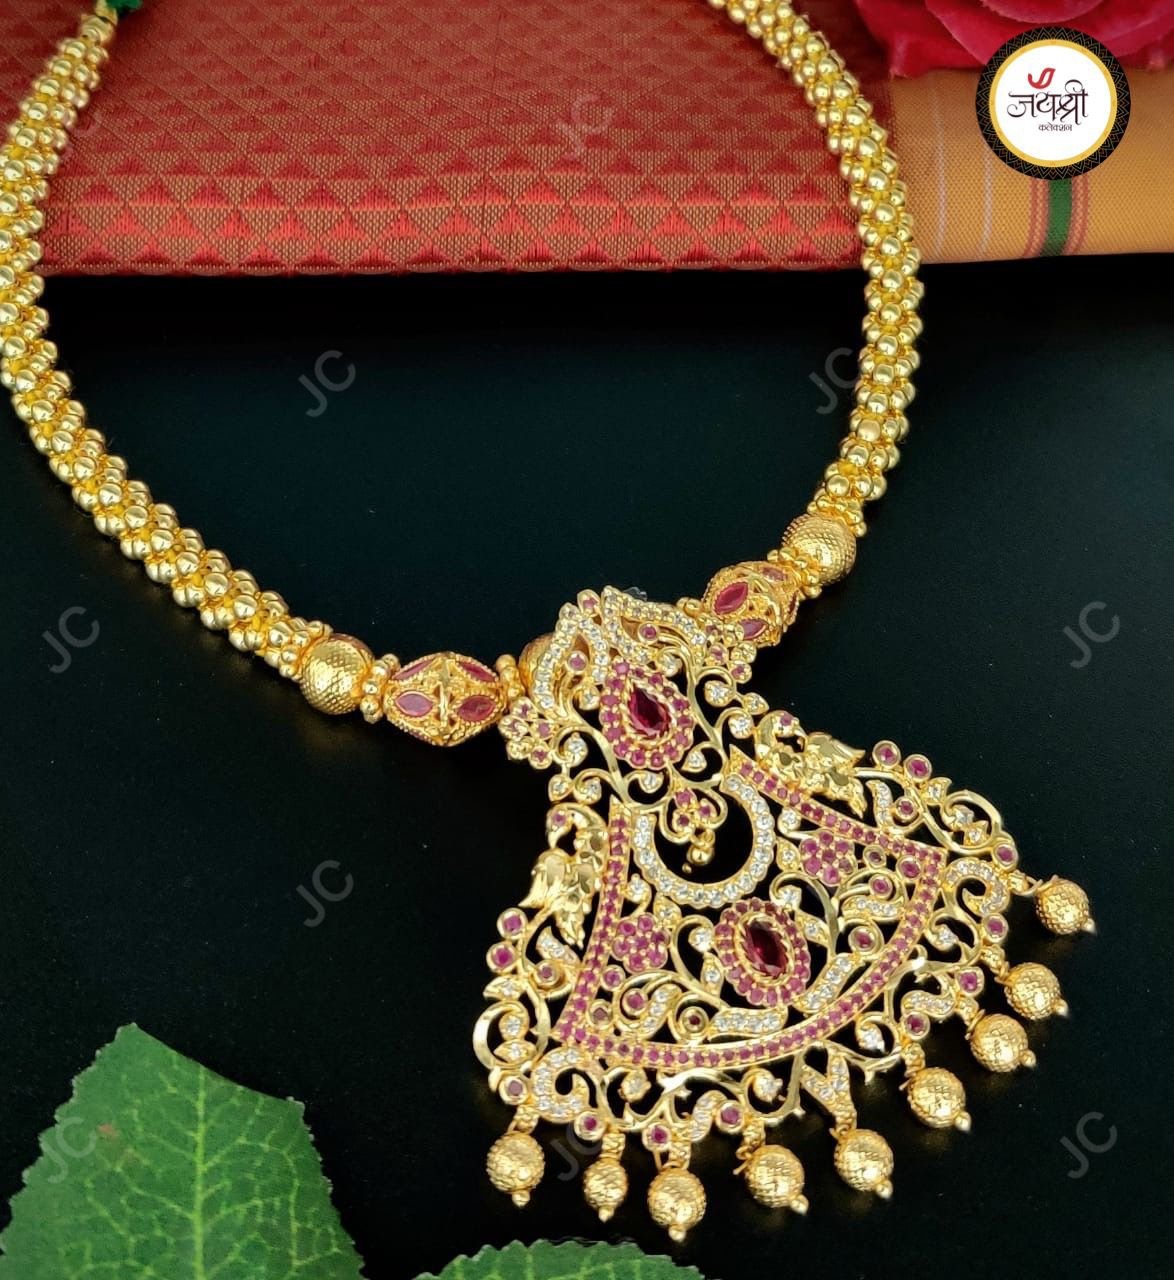 Shaandar Jeweller on Instagram: “SPECIAL OFFER💯 - NEW 22CT GOLD GHANI SETS  FOR THE BEST PRICES… | Gold necklace designs, Gold bridal necklace, Gold  wedding jewelry